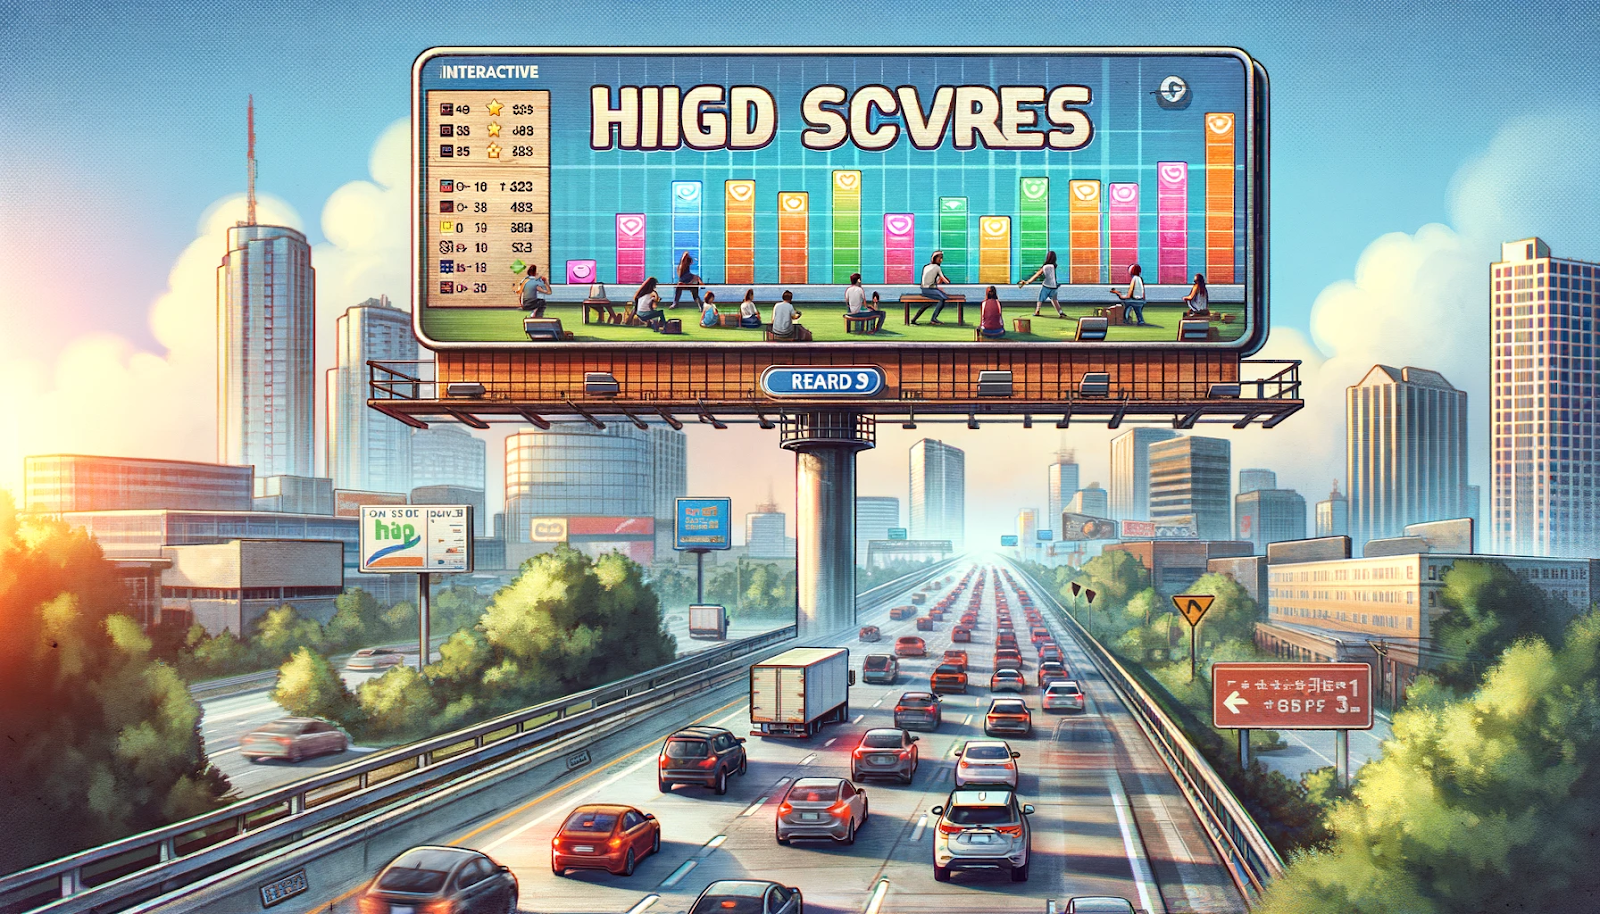 a classic billboard transformed into an interactive game leaderboard, overlooking a busy highway.